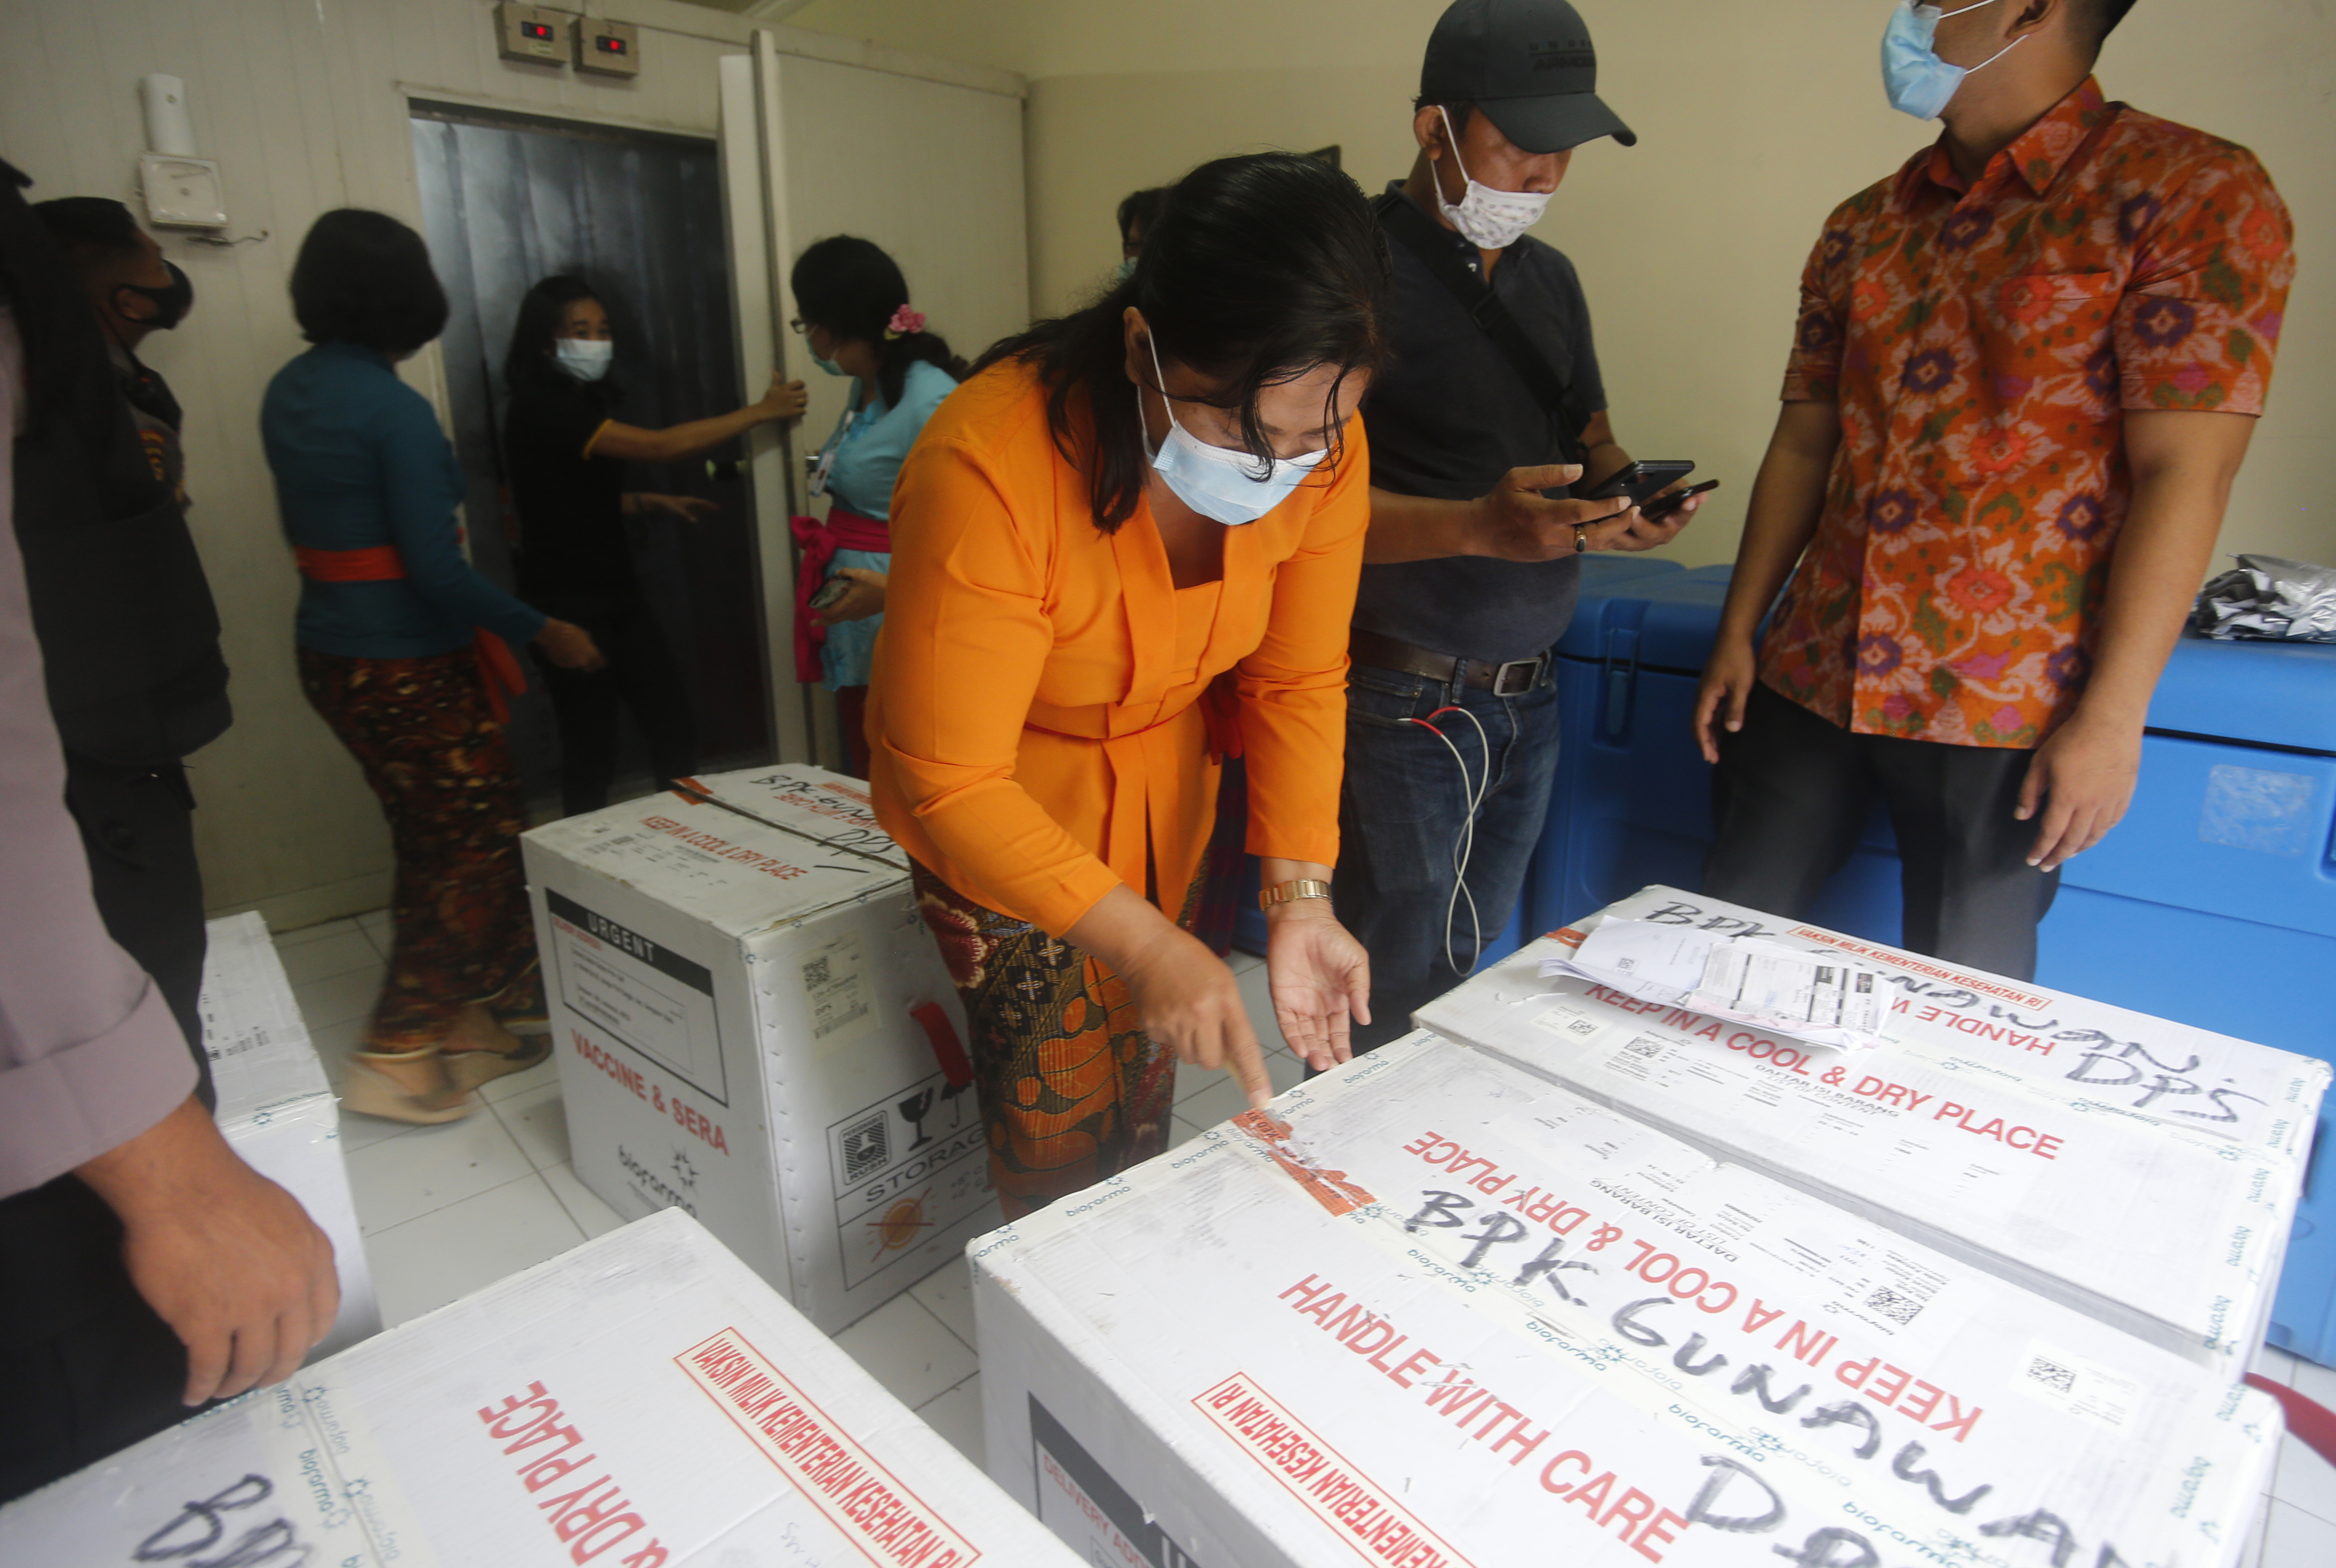 Health workers check the boxes containing coronavirus vaccines developed by China's Sinovac Biotech as they arrived in Bali, Indonesia on Thursday, Jan. 7, 2021. (AP Photo/Firdia Lisnawati)